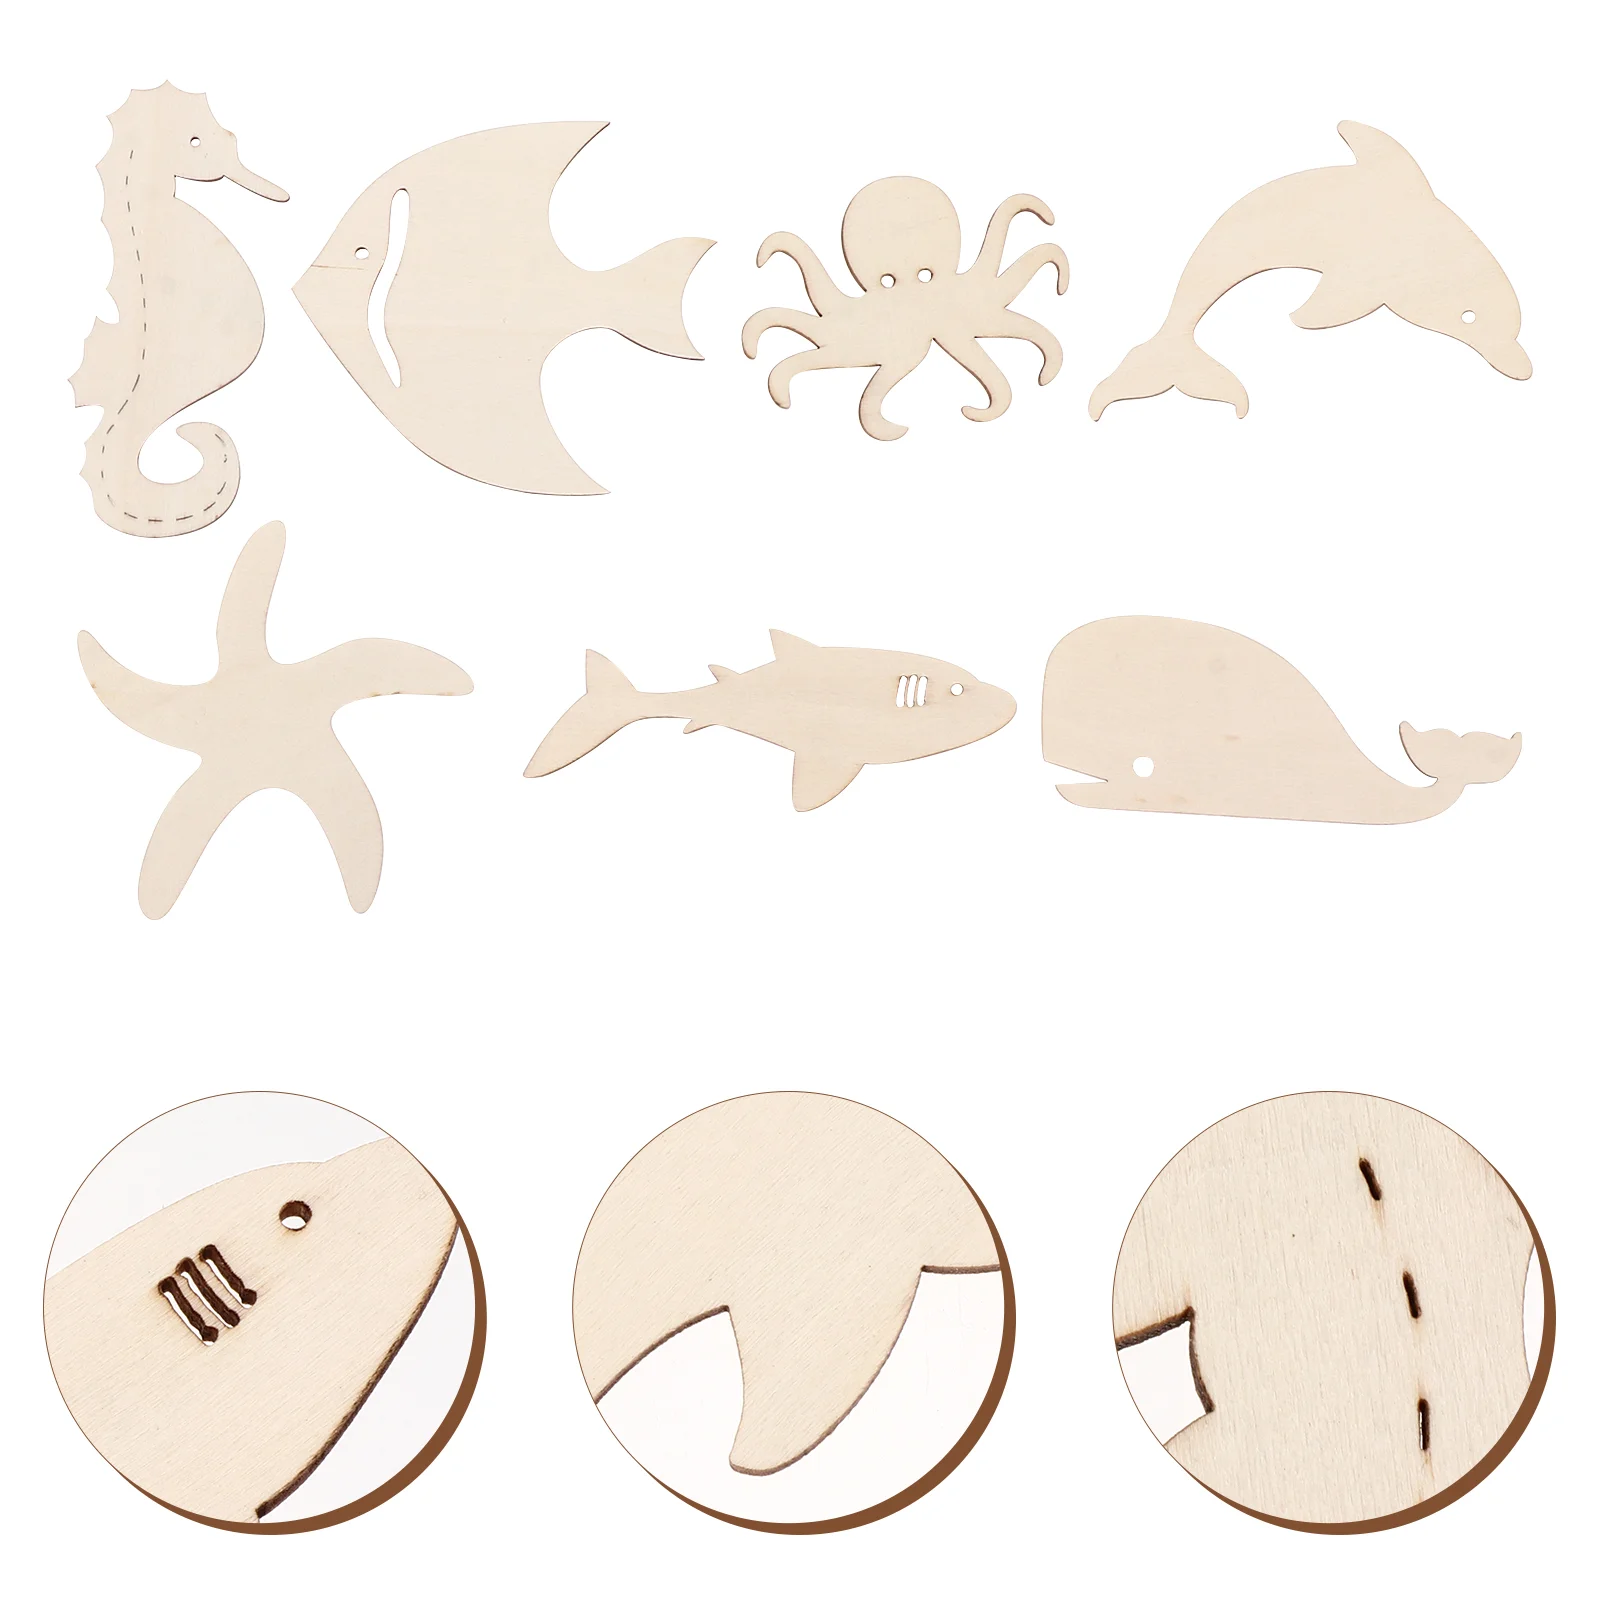 

28 Pcs Doodle Marine Wood Chips Ocean Animals Cutout Gifts Wooden Plate Unfinished Slice Decoration Ornament Seaside Toy